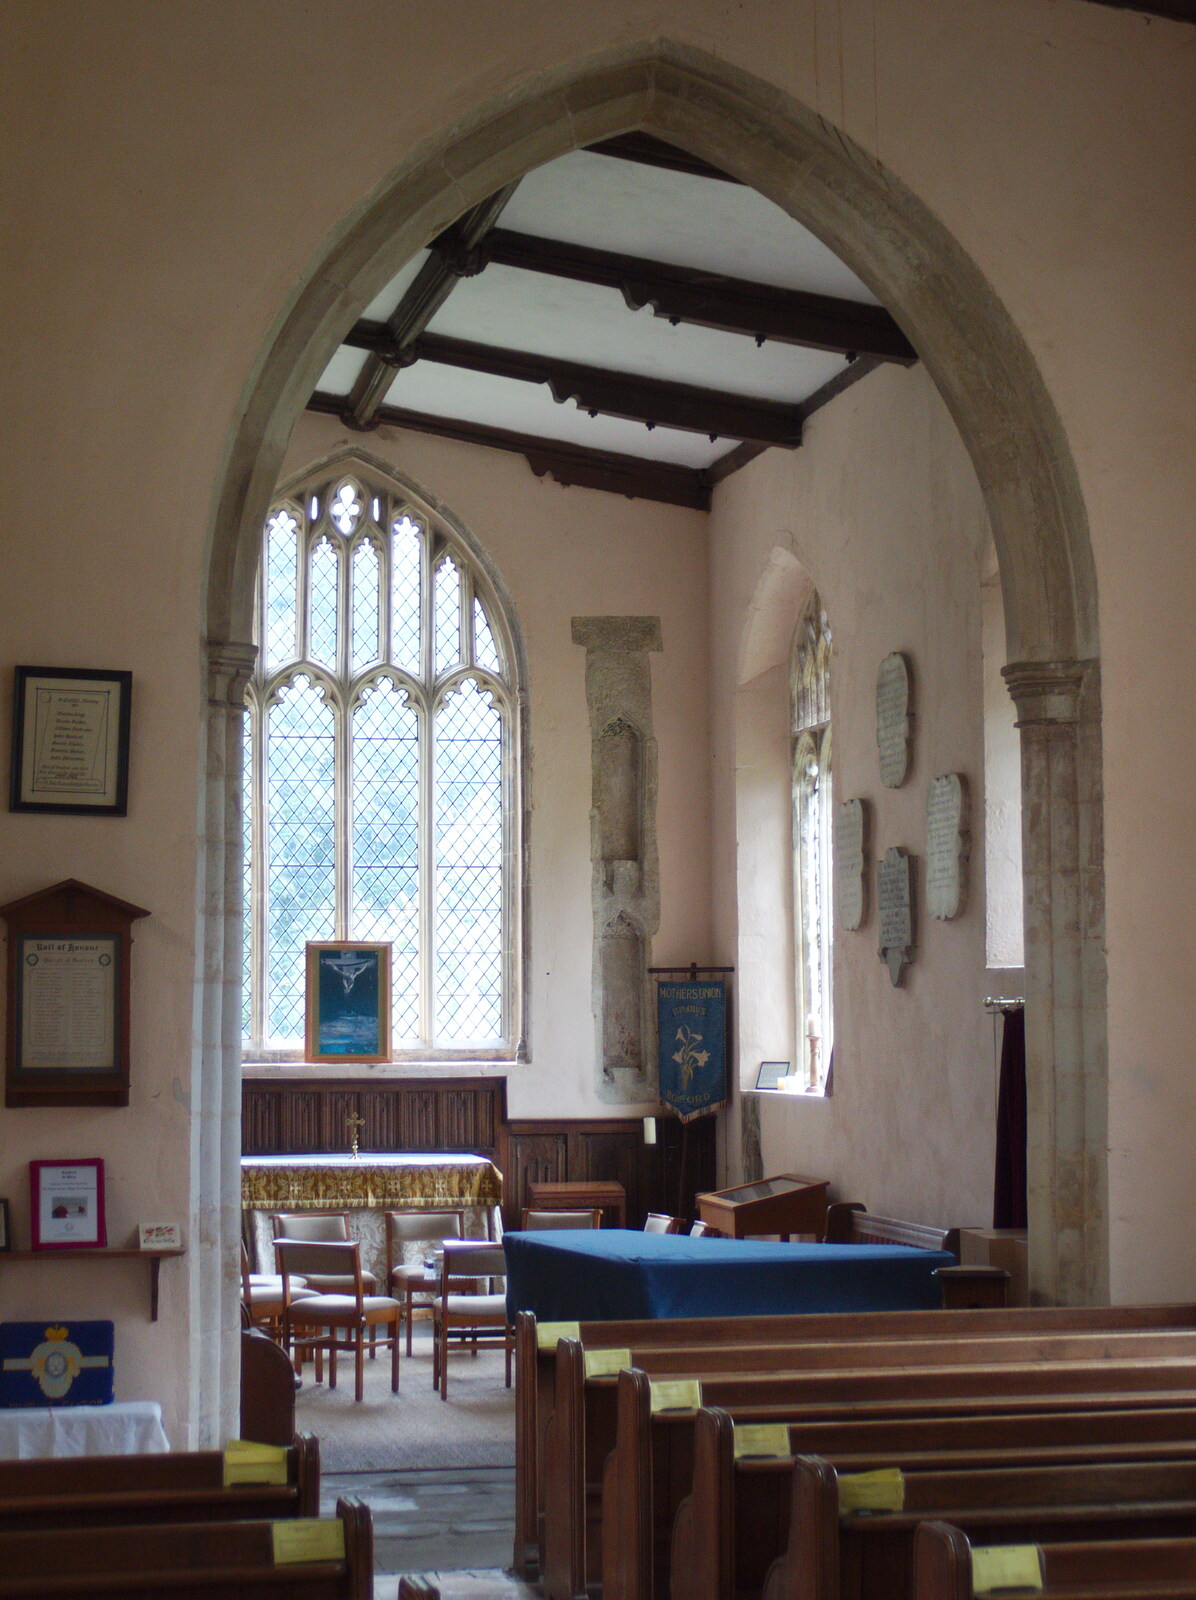 A Postcard from Boxford and BSCC at Pulham, Suffolk and Norfolk - 13th July 2019: A transept at St. Mary's